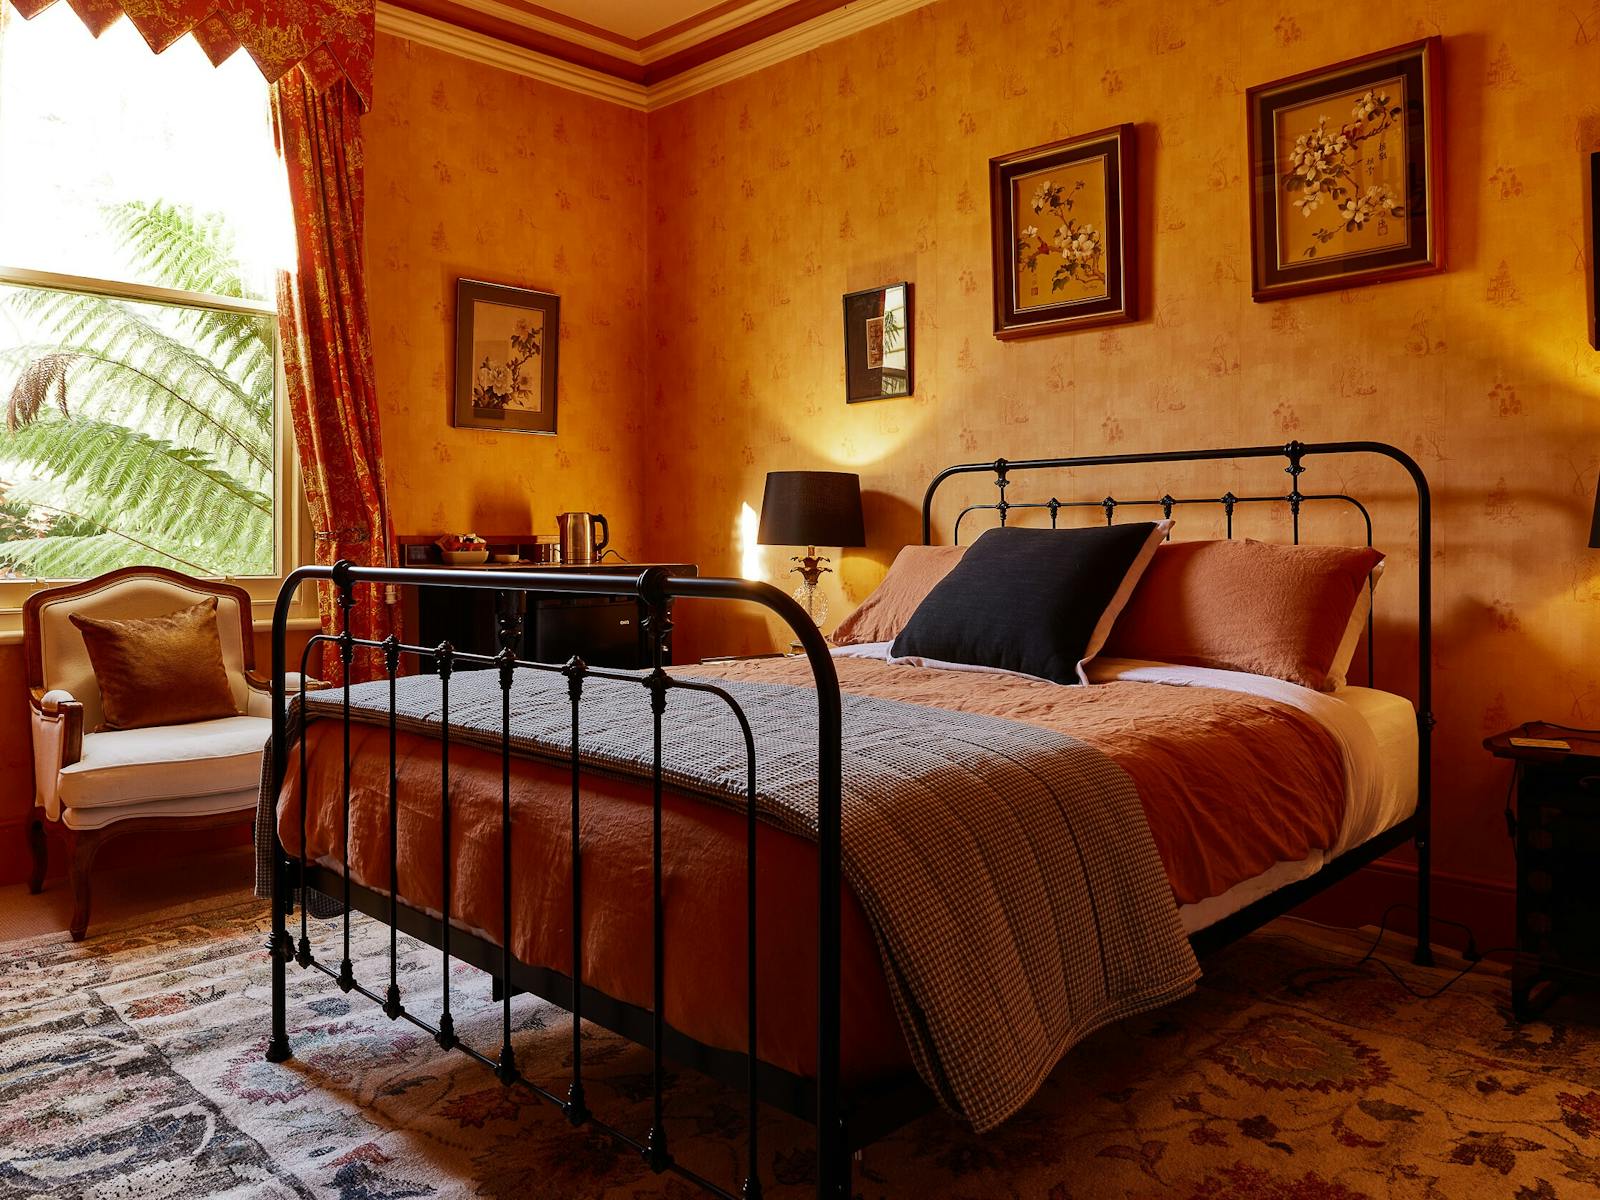 A wrought iron bed sits in a room with yellow wallpaper and heavy red curtains.